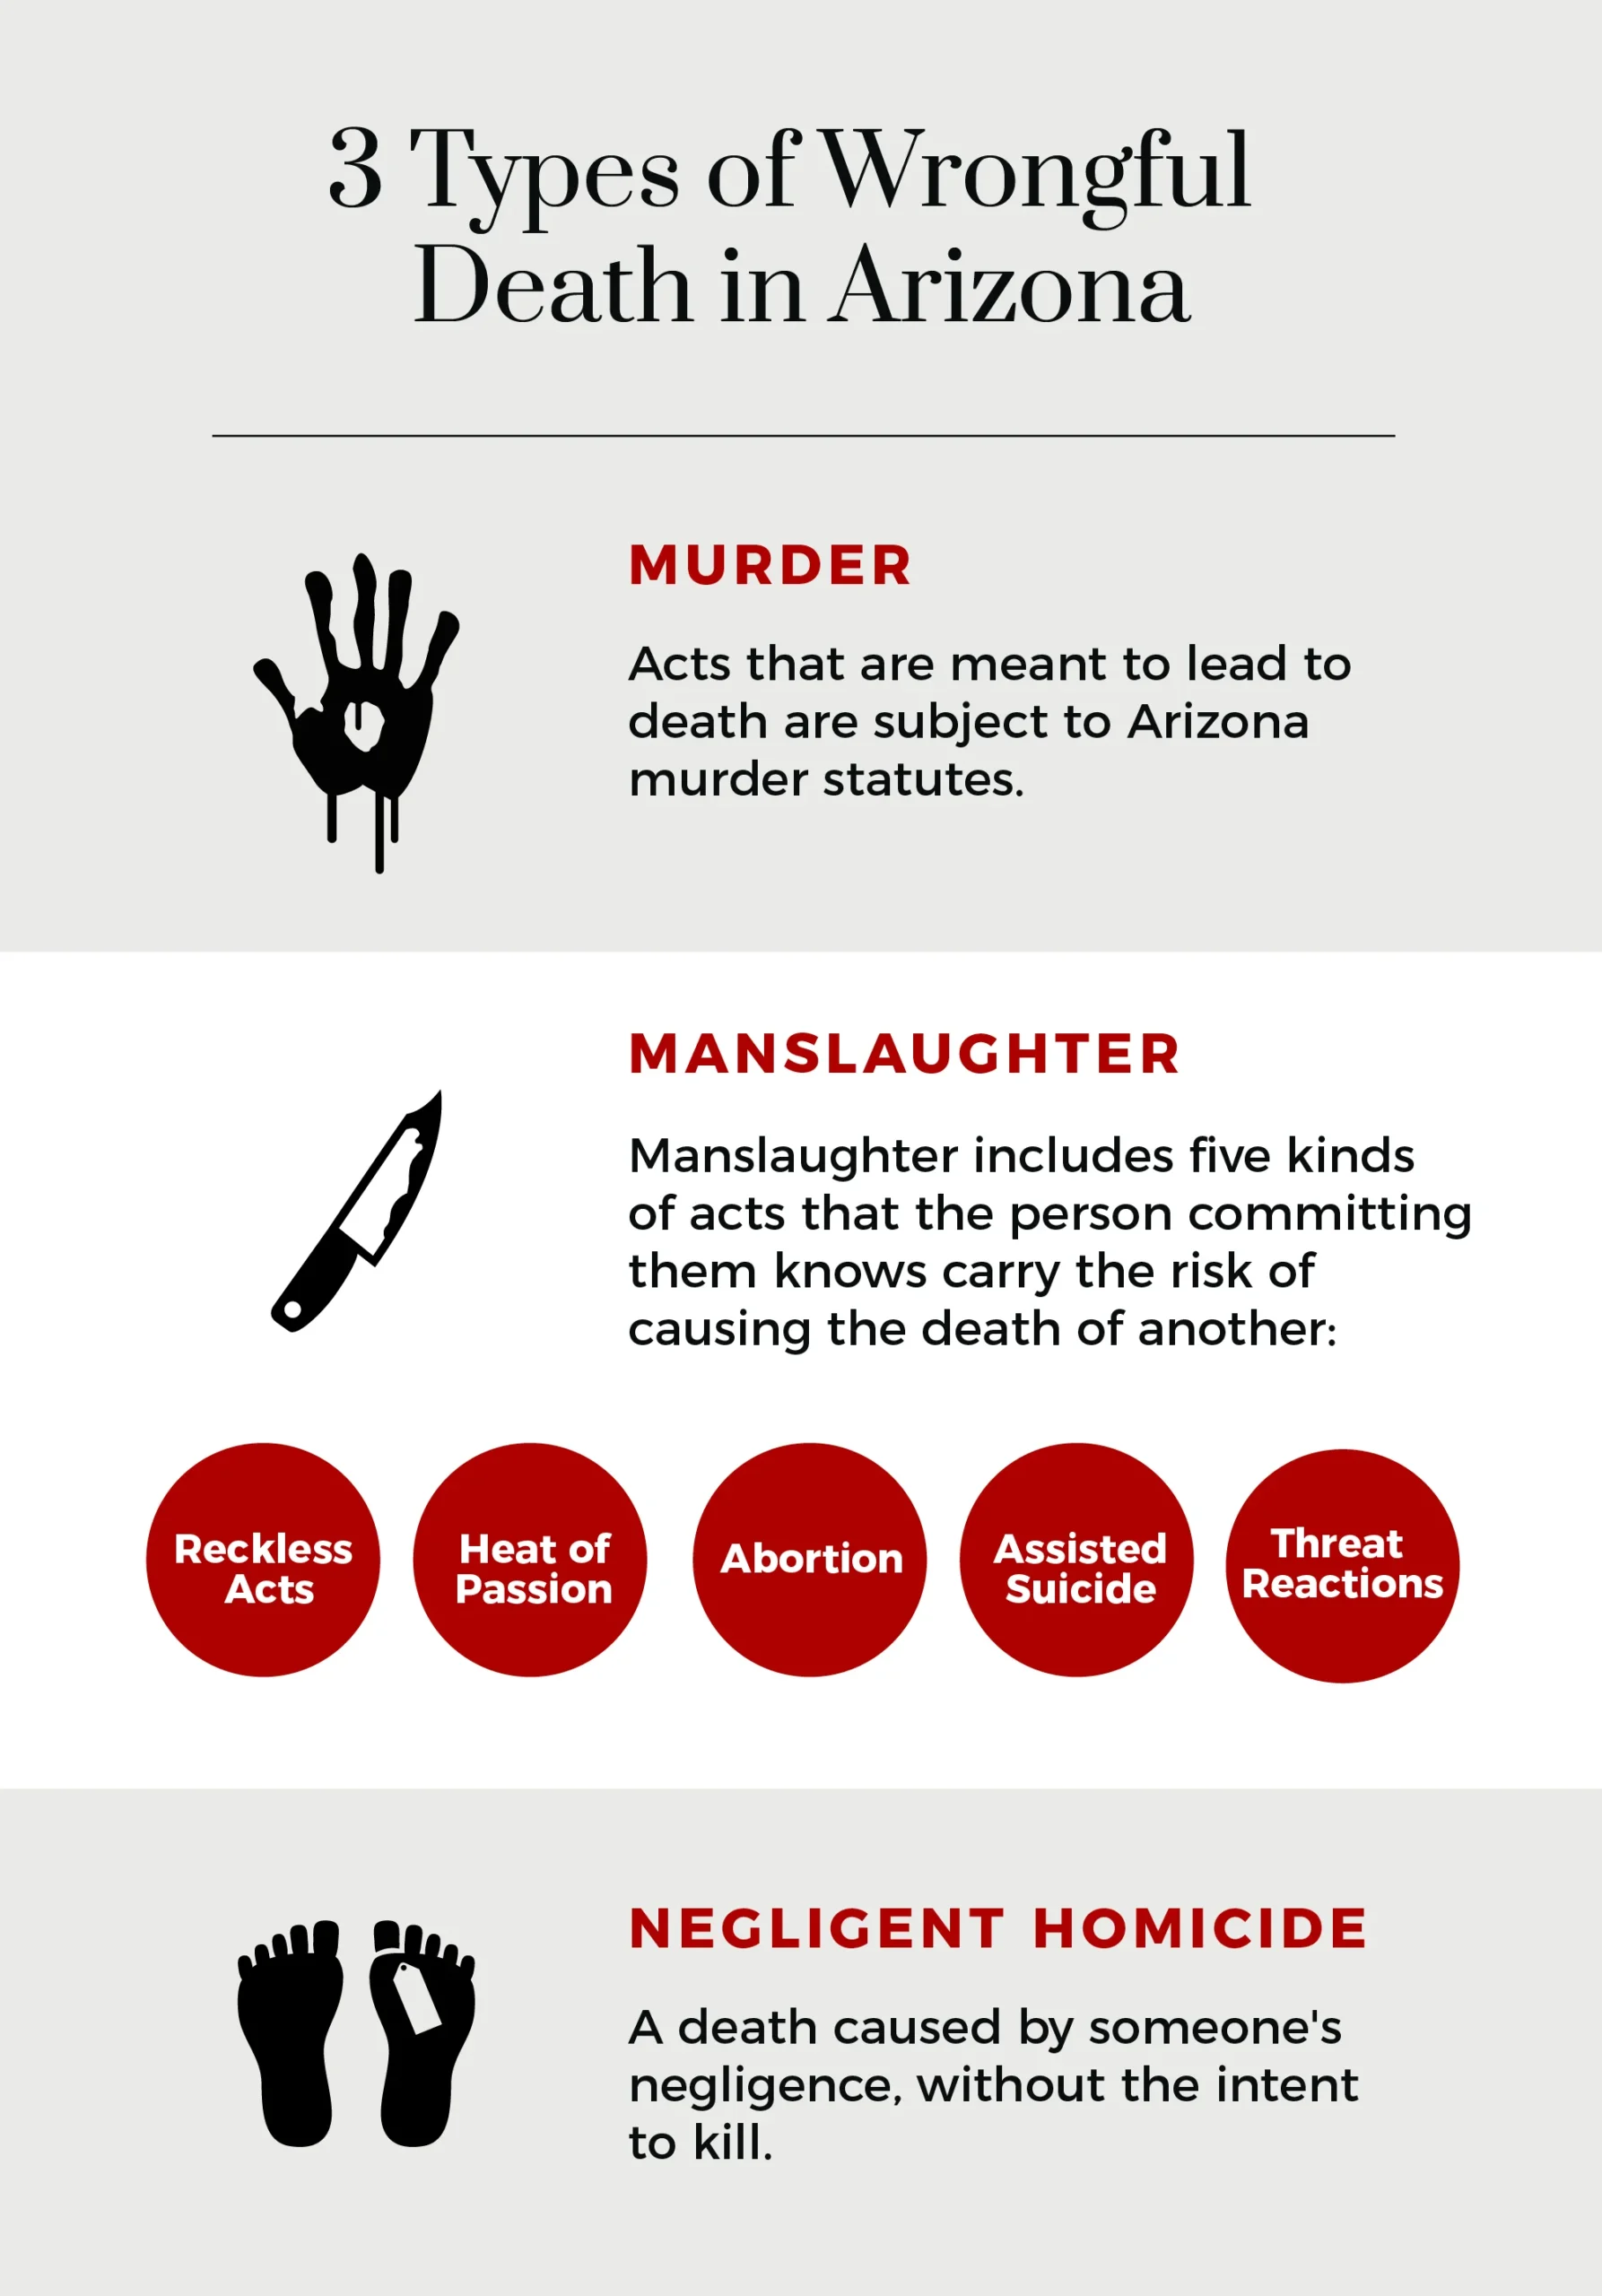 3 Types of Wrongful death in Arizona